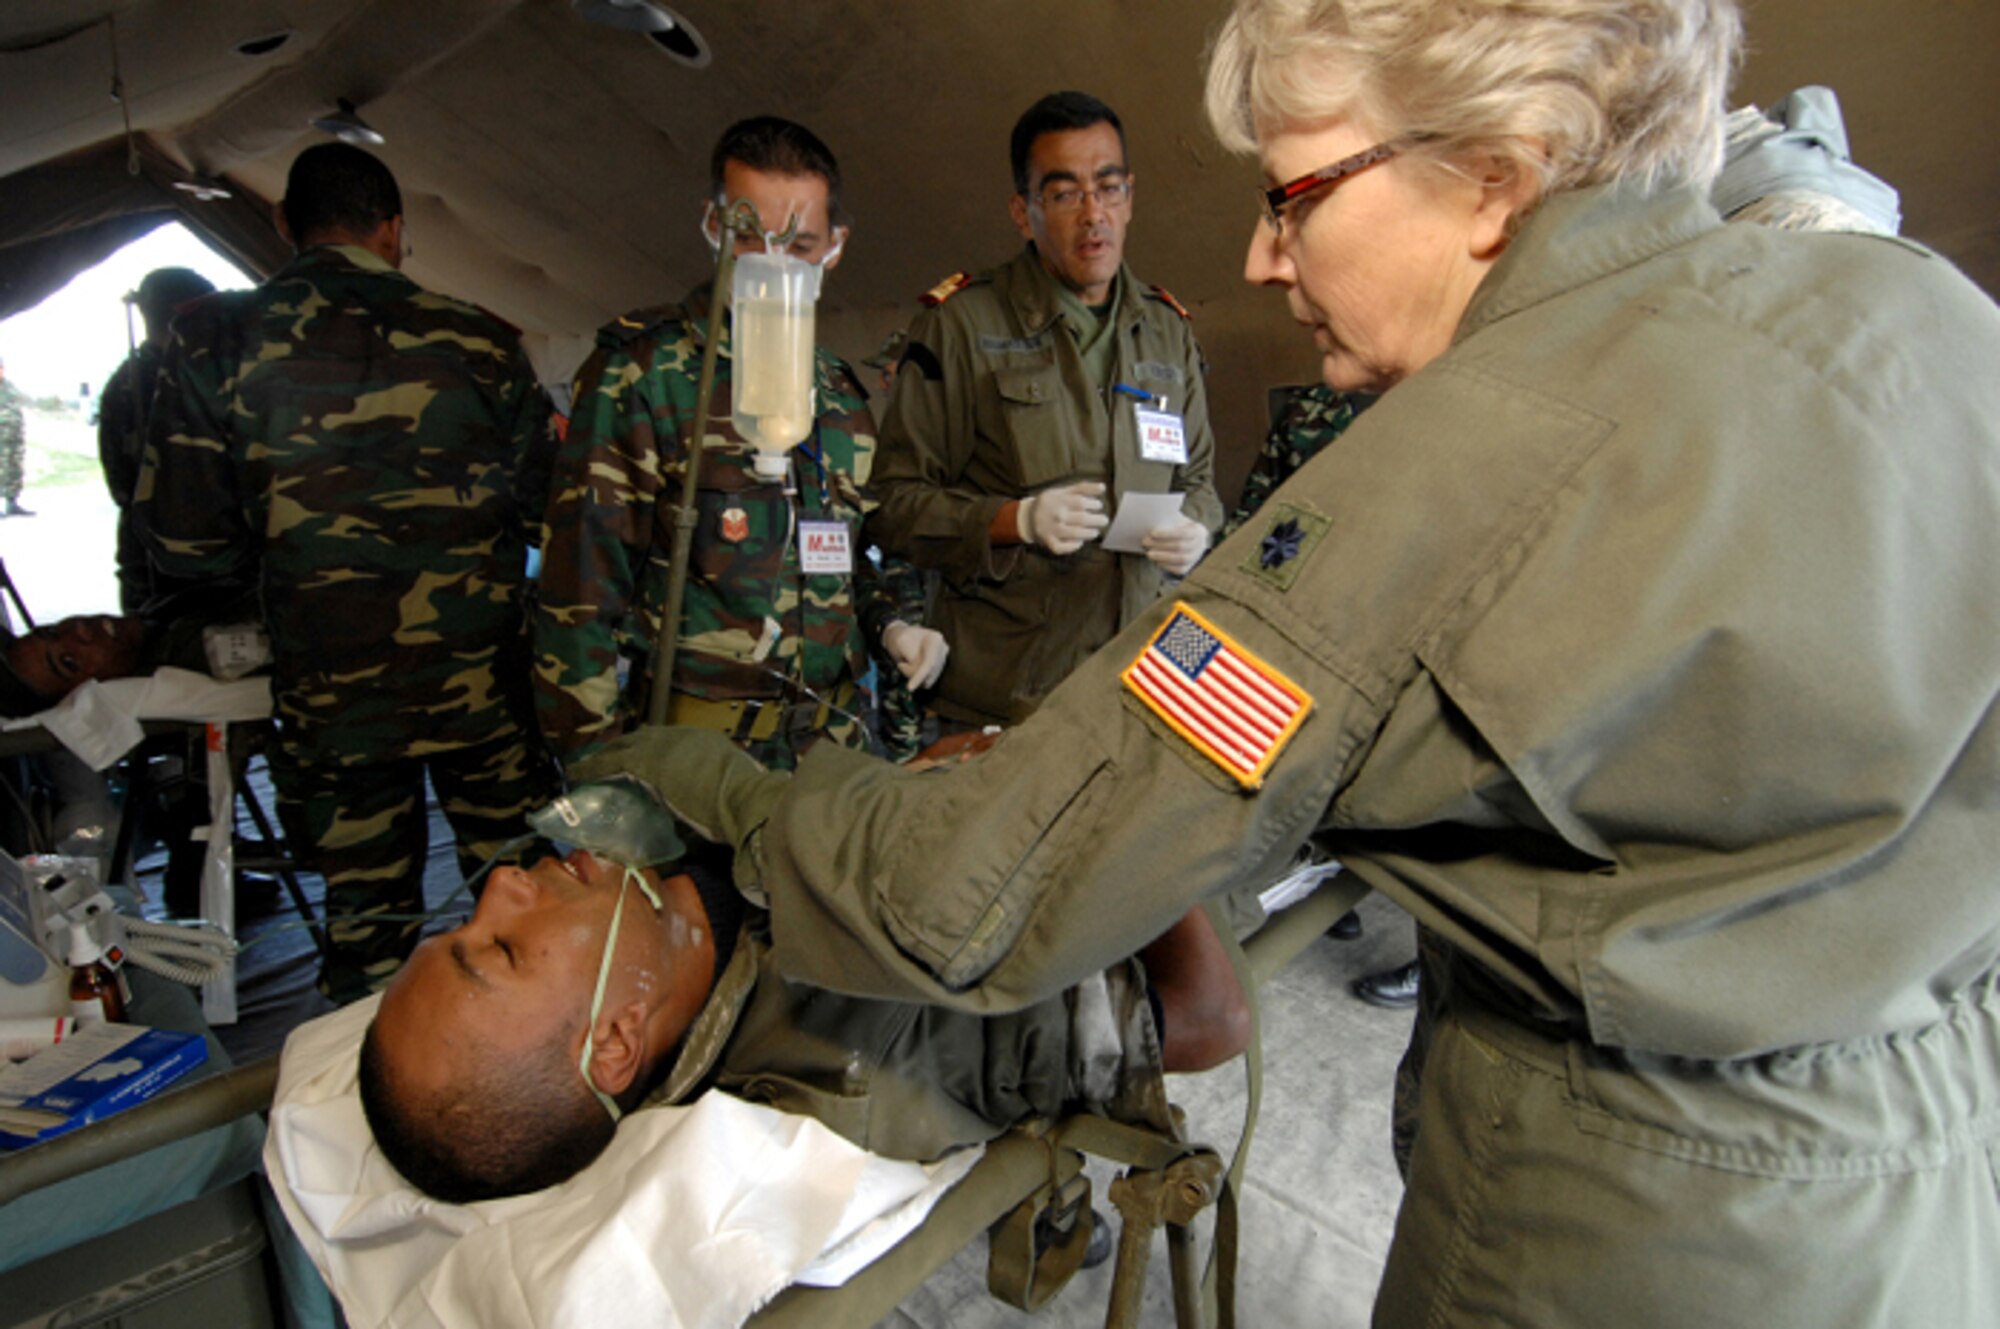 KHARROUBA AIR BASE, Tunisia -- U.S. Air Force Lt. Col. Margaret Schmidt (right), Chief Nurse from the 459th Aeromedical Evacuation Squadron, Andrews Air Force Base, Md., applies a simple face oxygen mask to a simulated victim during a mock Nov. 17 during Medlite 2008. Medlite is a Joint Chiefs of Staff Exercise designed to provide and exchange medical skills, techniques and procedures between members of the U.S. Air Force, U.S. Army and Tunisian Military Health Services. (U.S. Air Force photo/Senior Airman Erica Knight)